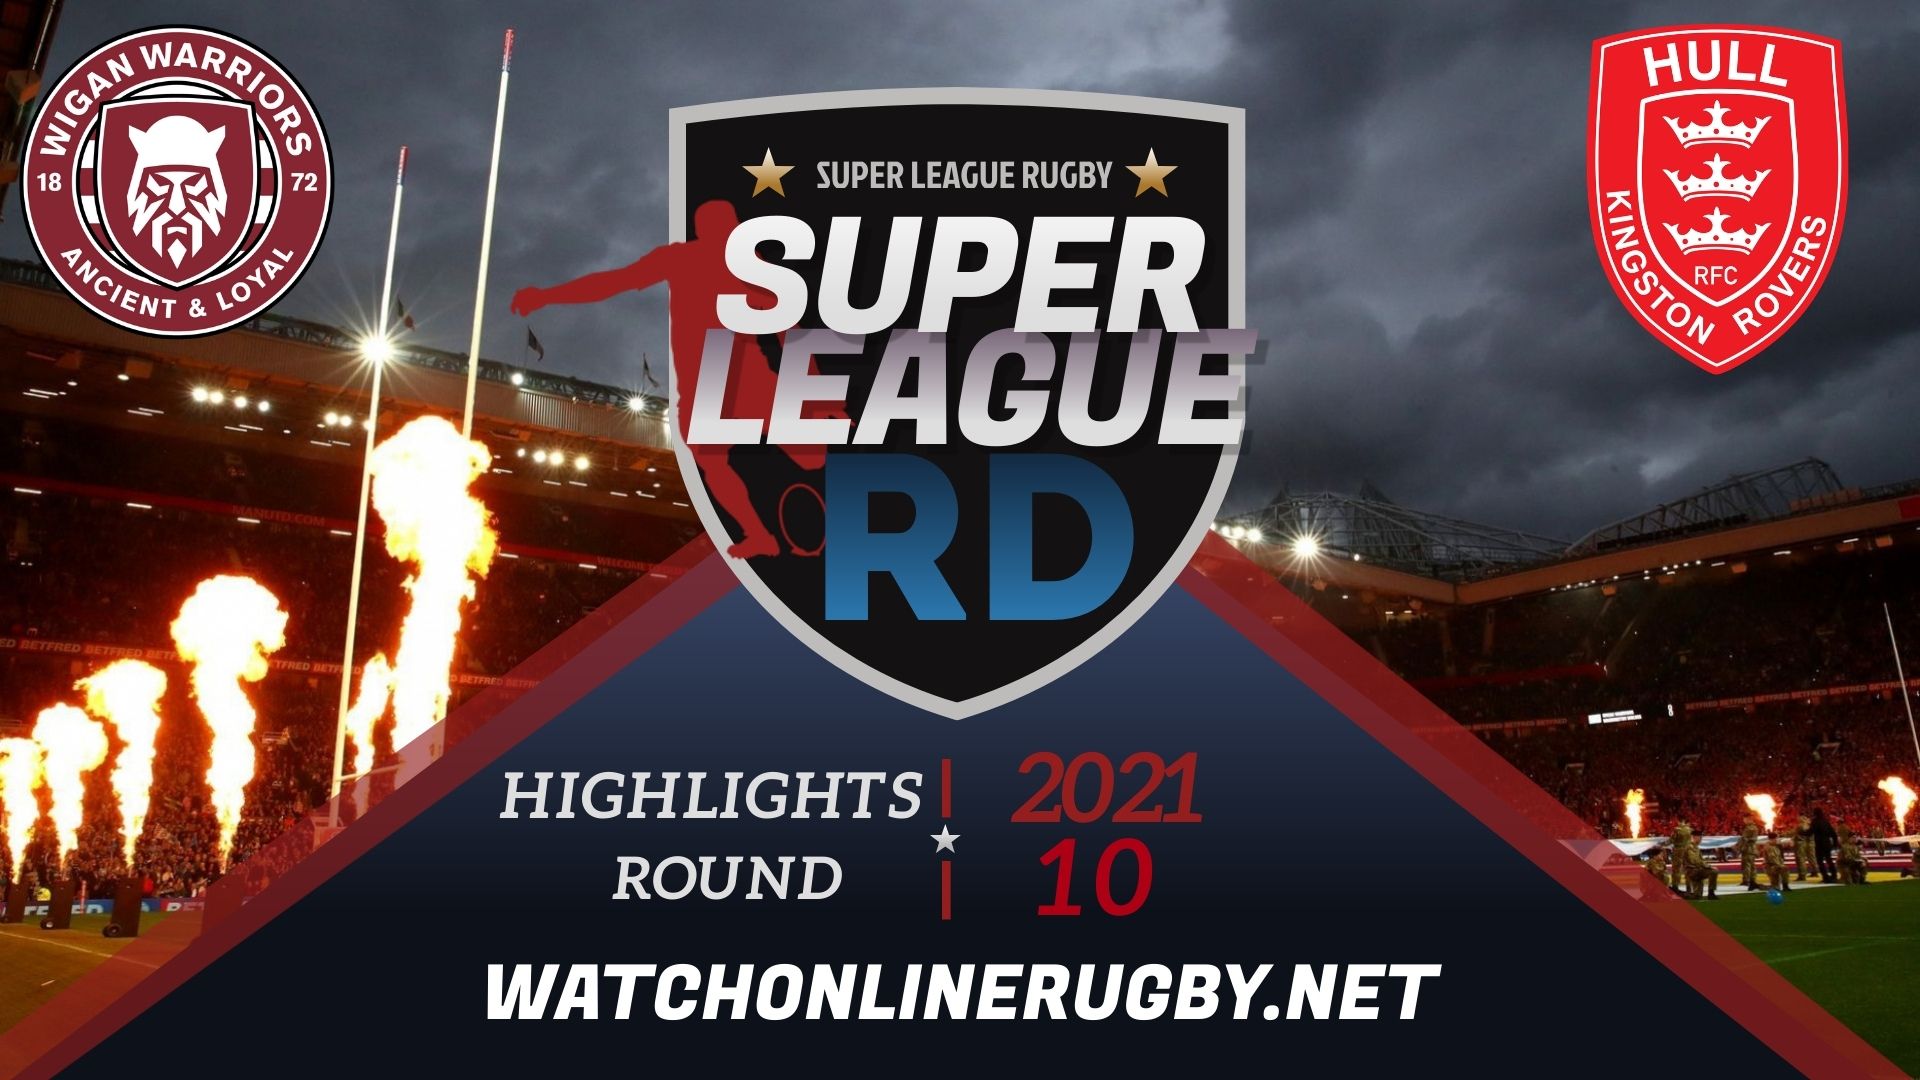 Wigan Warriors Vs Hull Kingston Rovers Super League Rugby 2021 RD 10